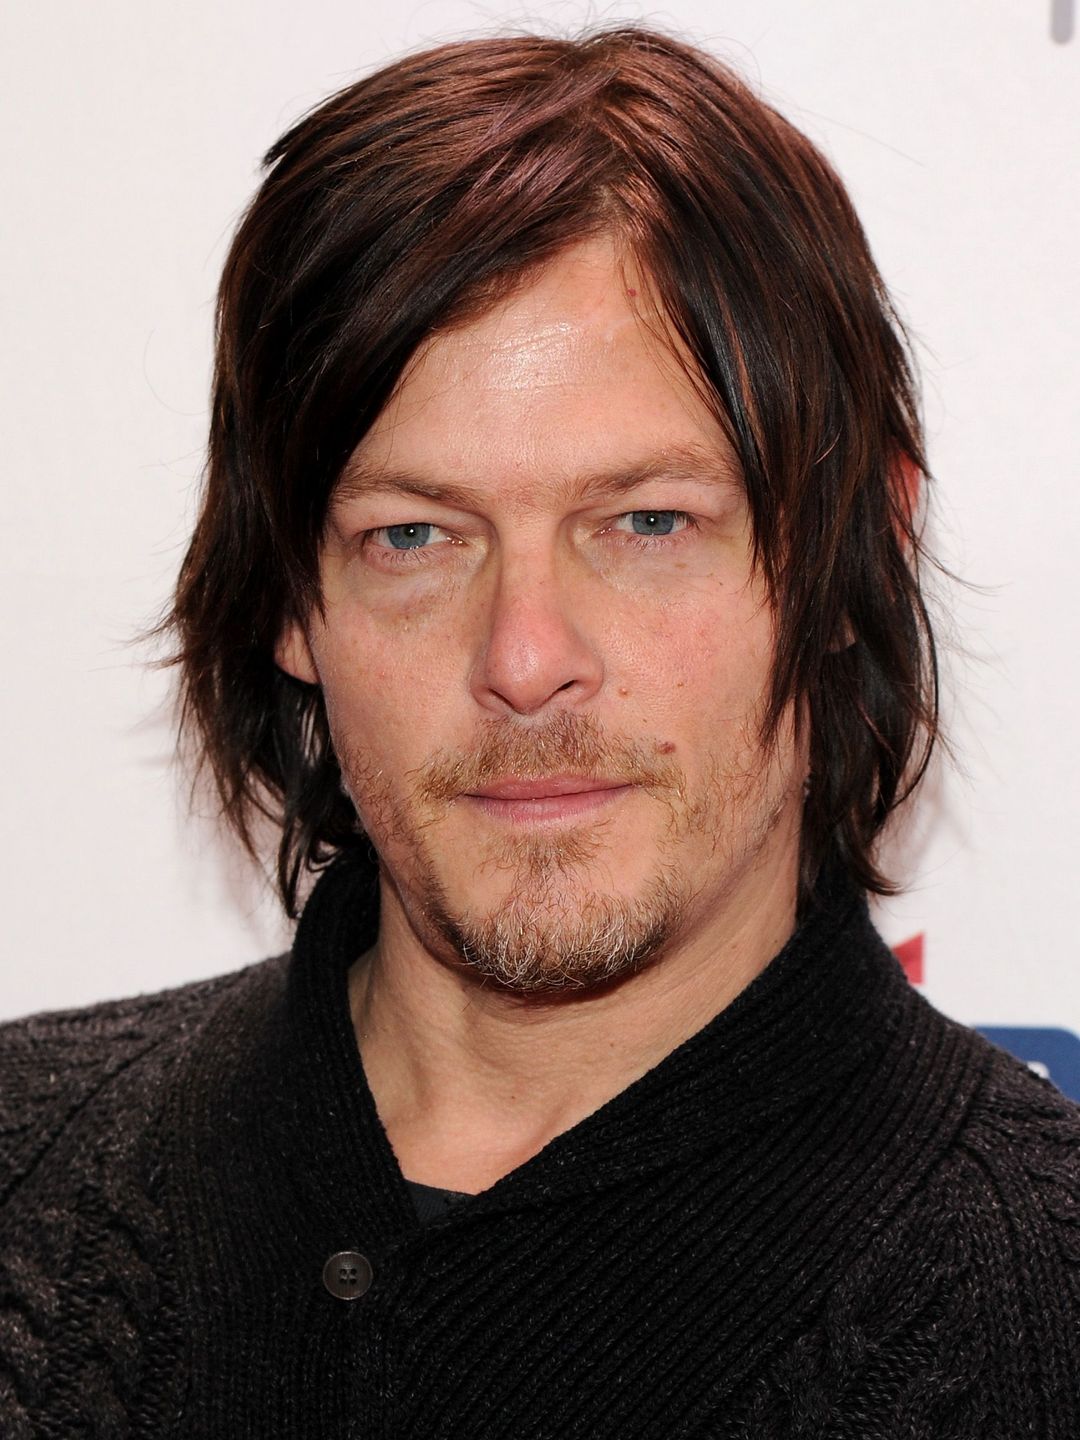 Norman Reedus does he have a wife